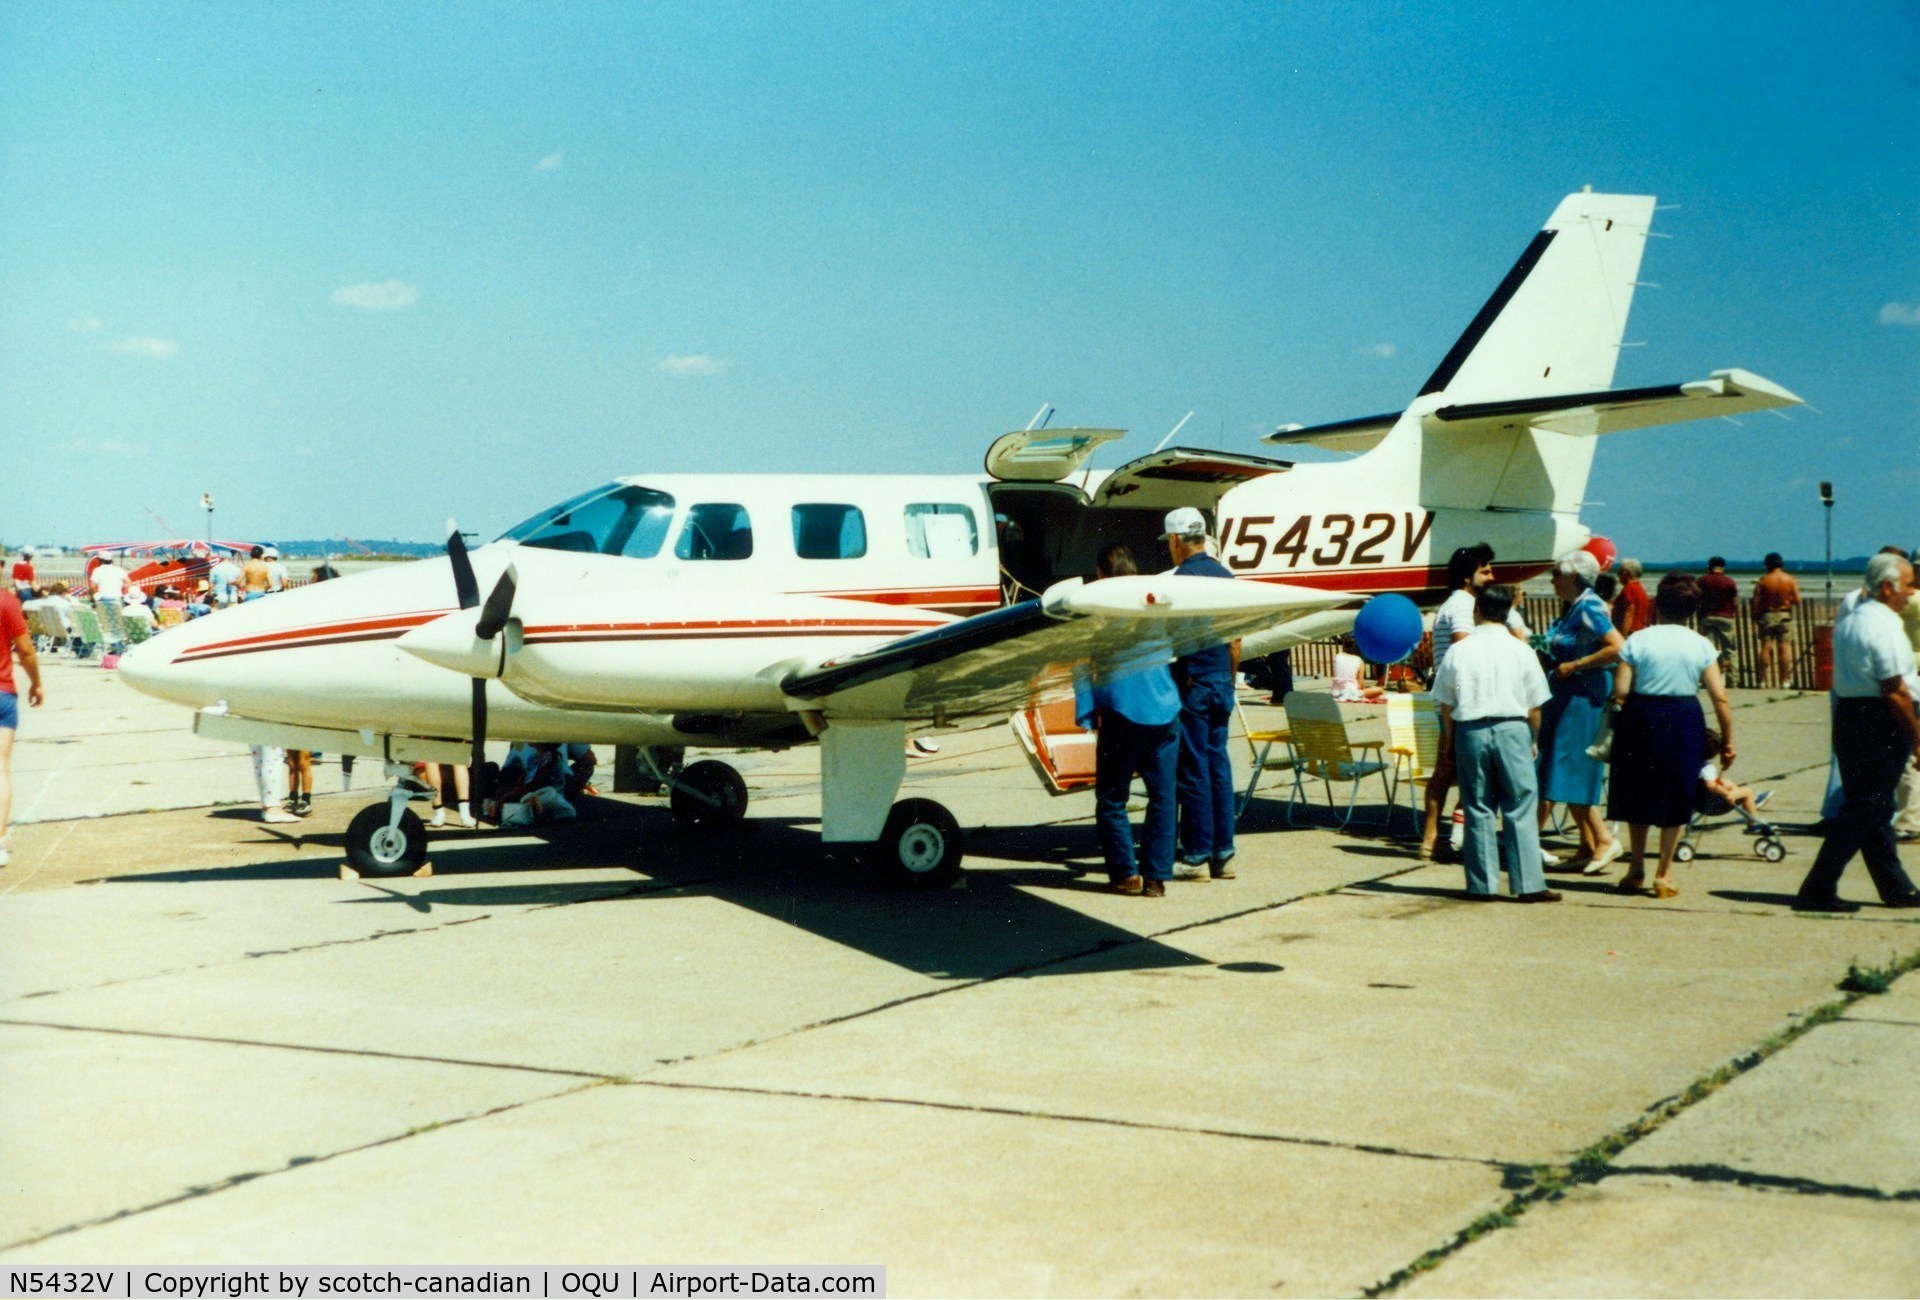 N5432V, Piper PA-31T C/N 31T-7620046, Aircraft N5432V on display at Quonset State Airport, North Kingstown, RI - circa 1980's